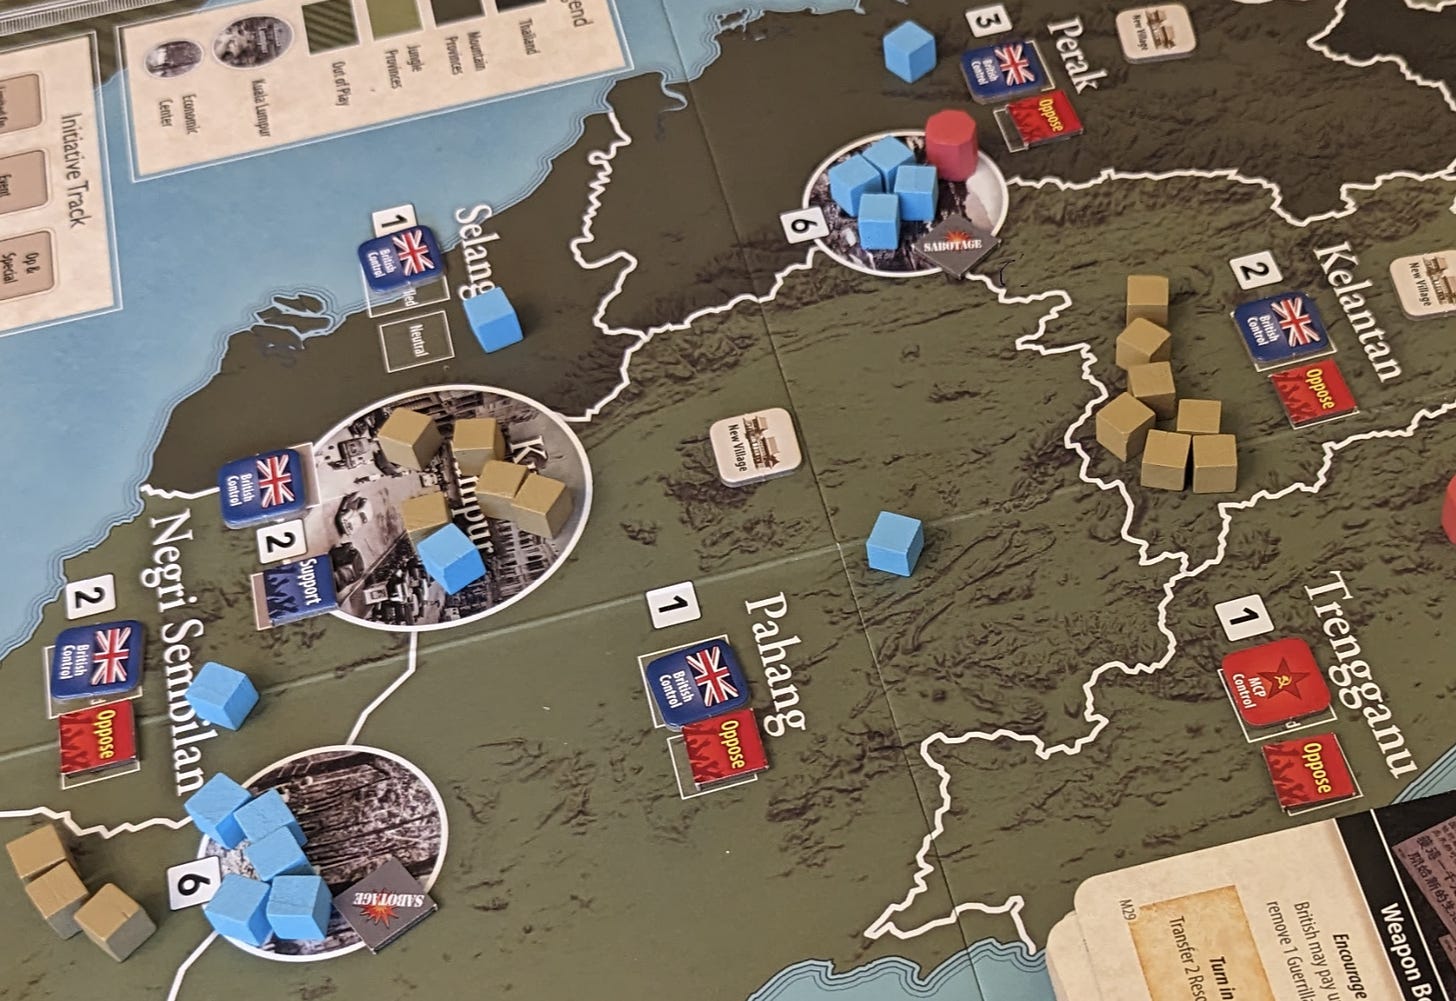 Mid-game board state of the Malaya scenario of the tabletop wargame The British Way